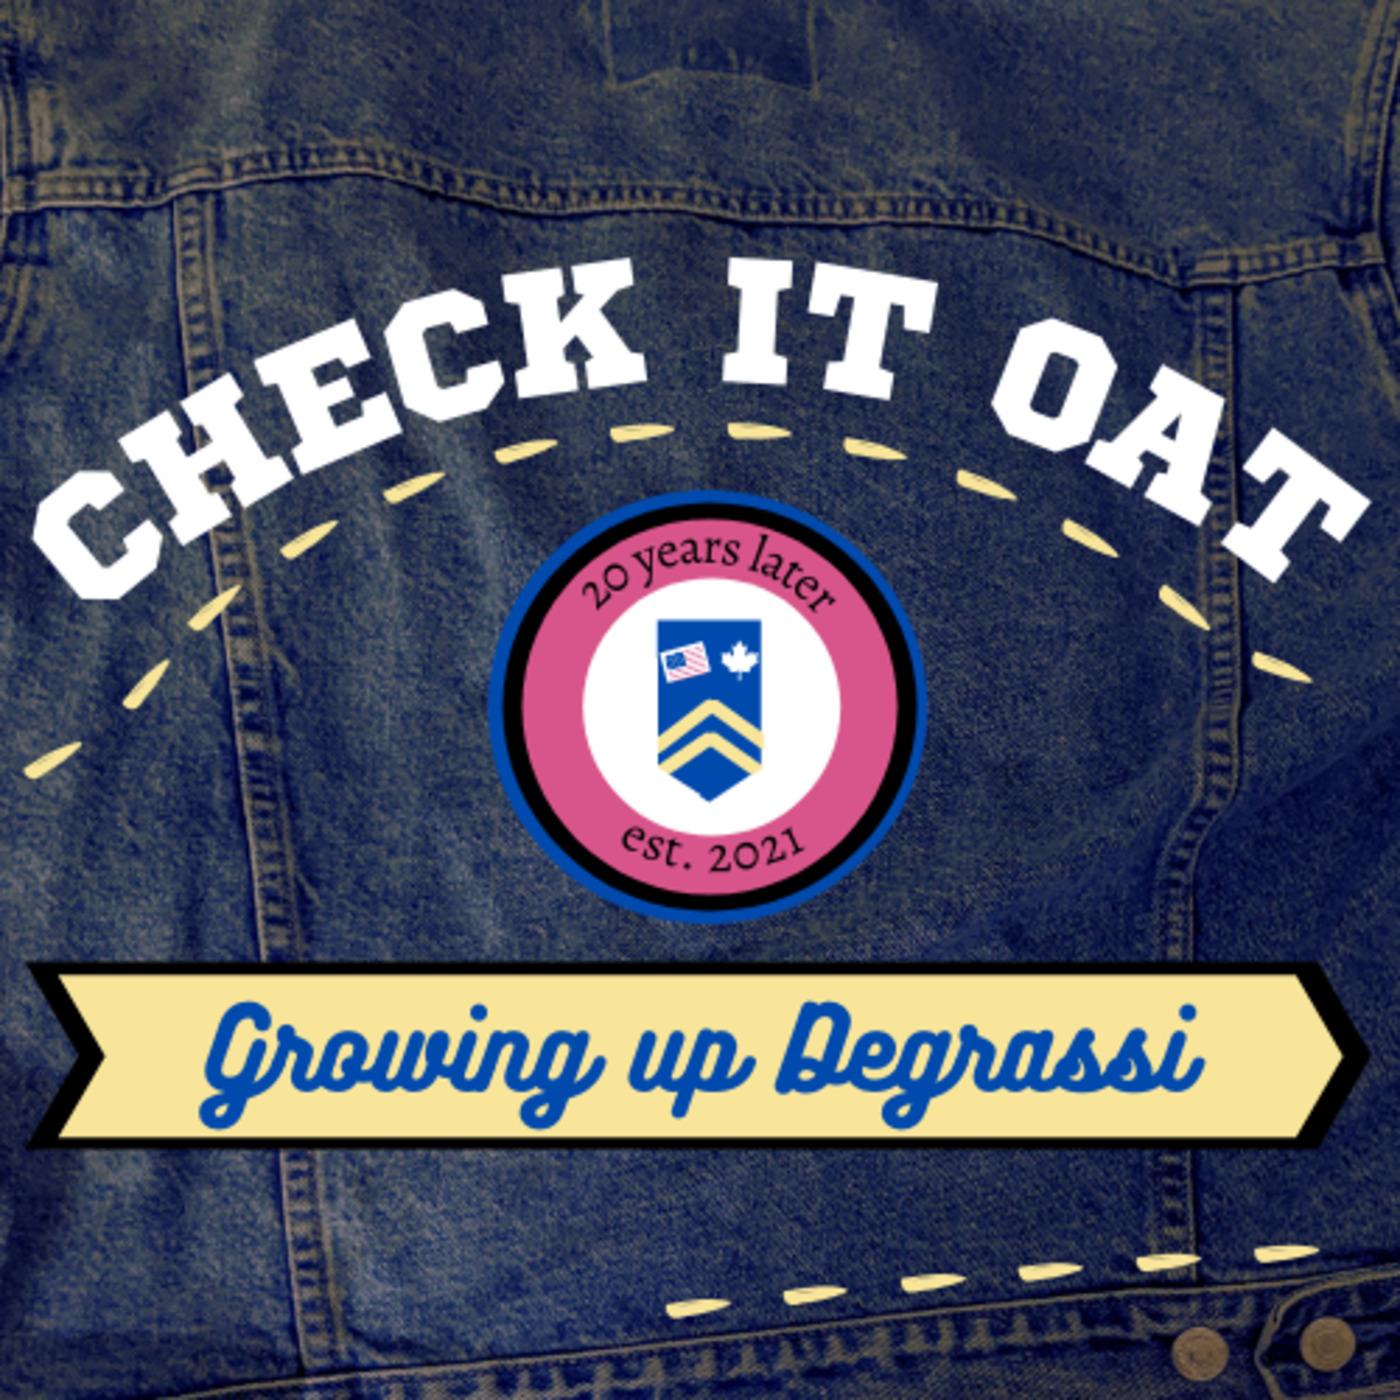 Check It Oat: Growing Up Degrassi